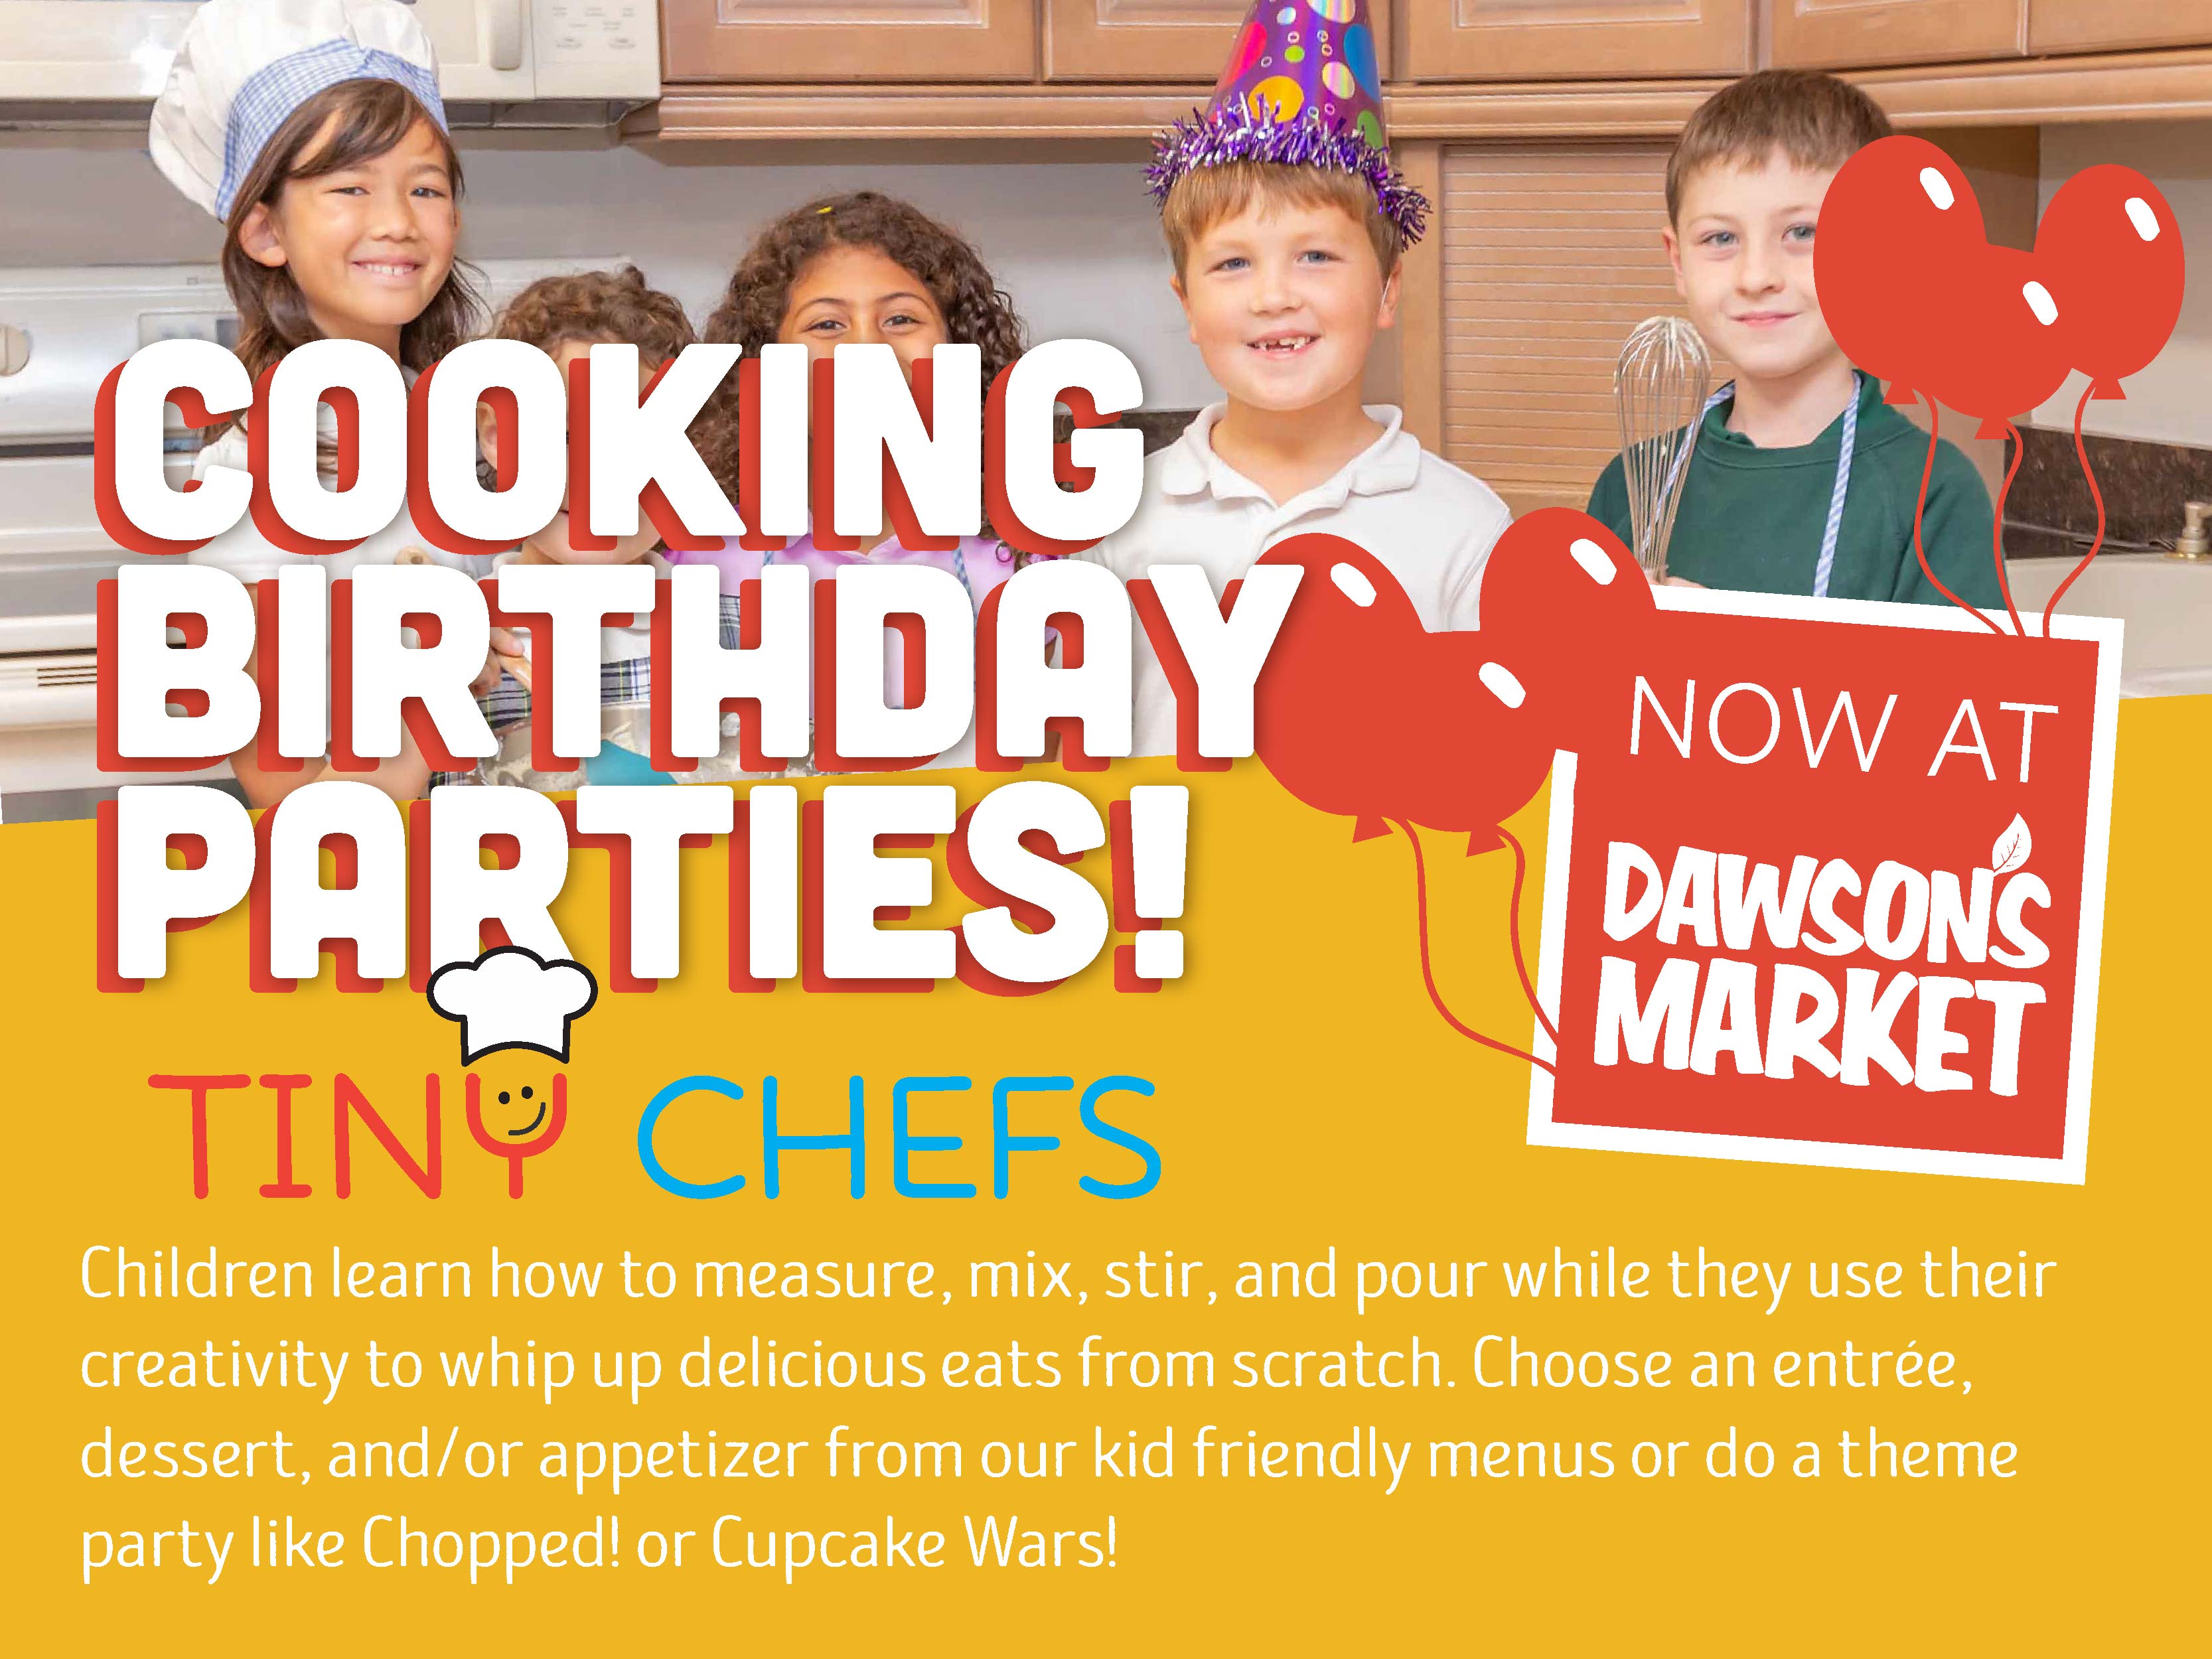 Cooking Birthday Parties